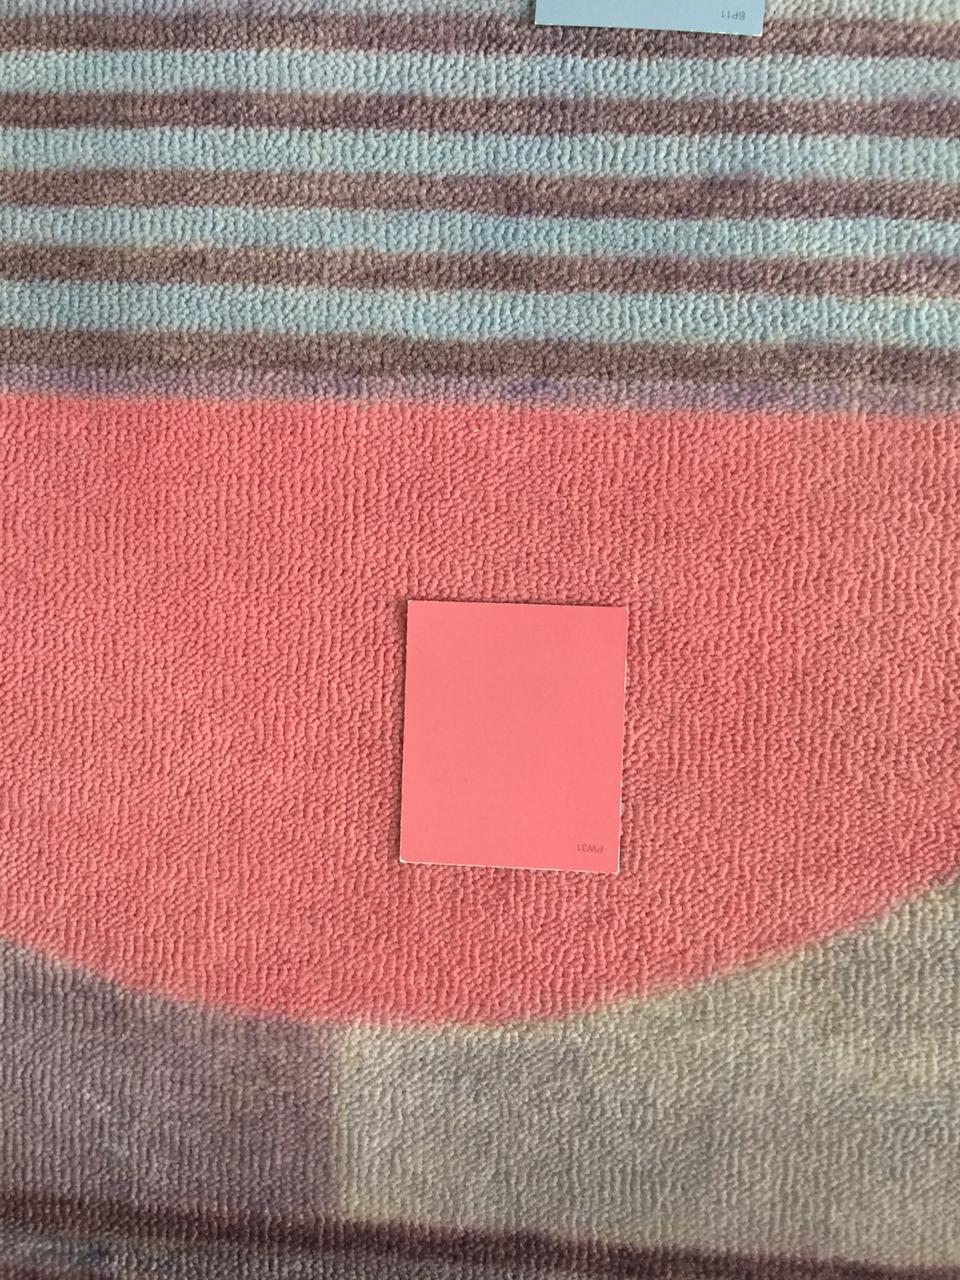 black white and pink rug